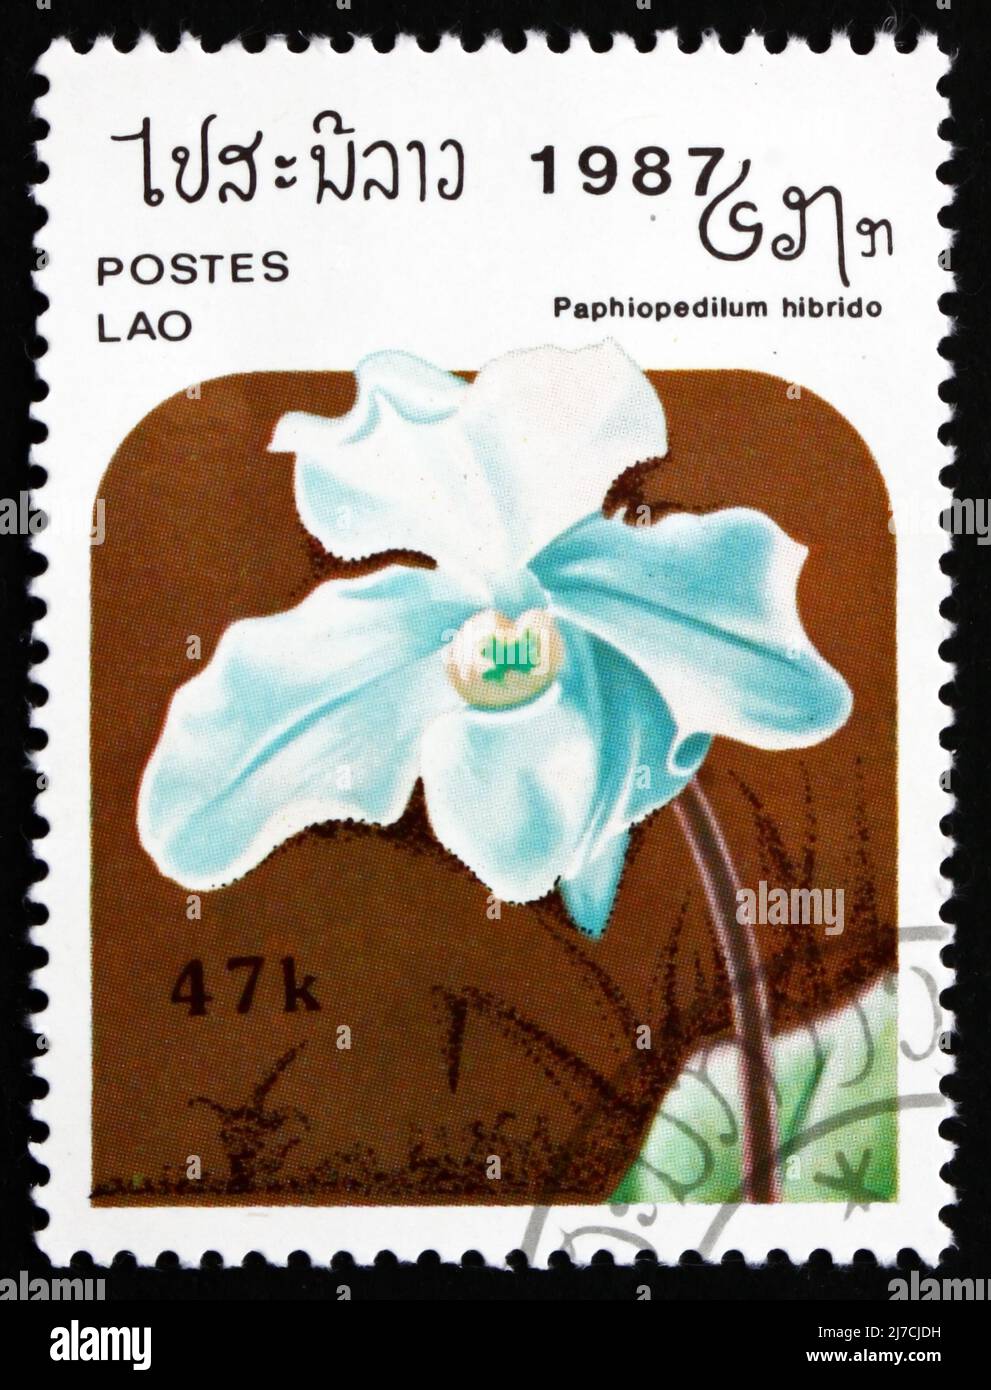 LAOS - CIRCA 1987: a stamp printed in Laos shows Paphiopedilum Hybrid, Orchid, Flower, circa 1987 Stock Photo